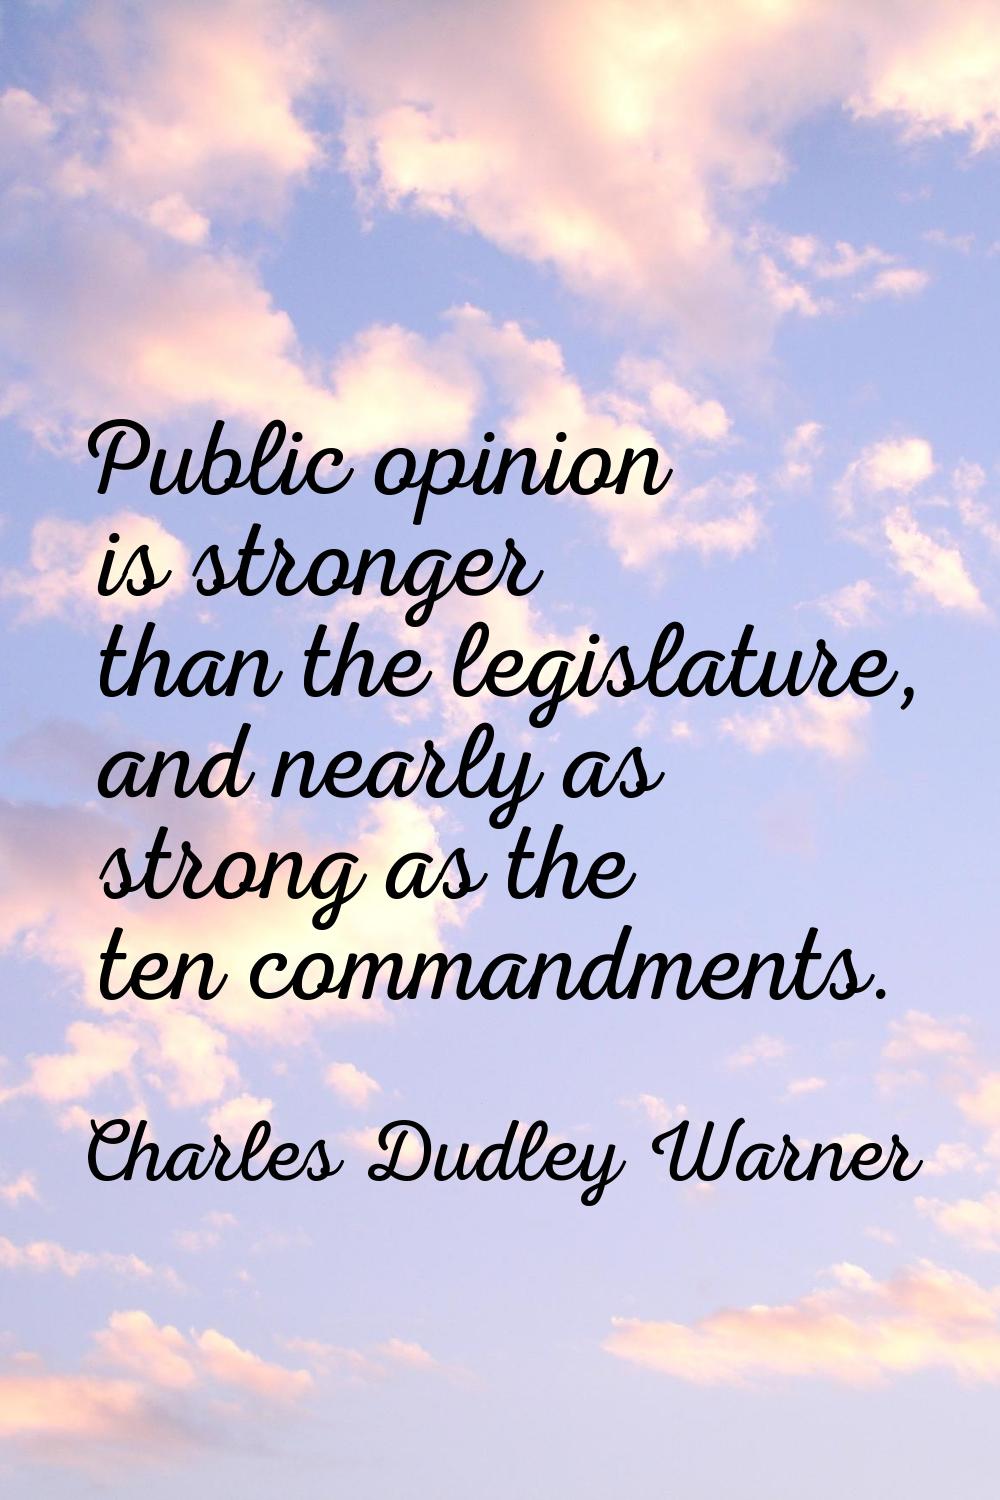 Public opinion is stronger than the legislature, and nearly as strong as the ten commandments.